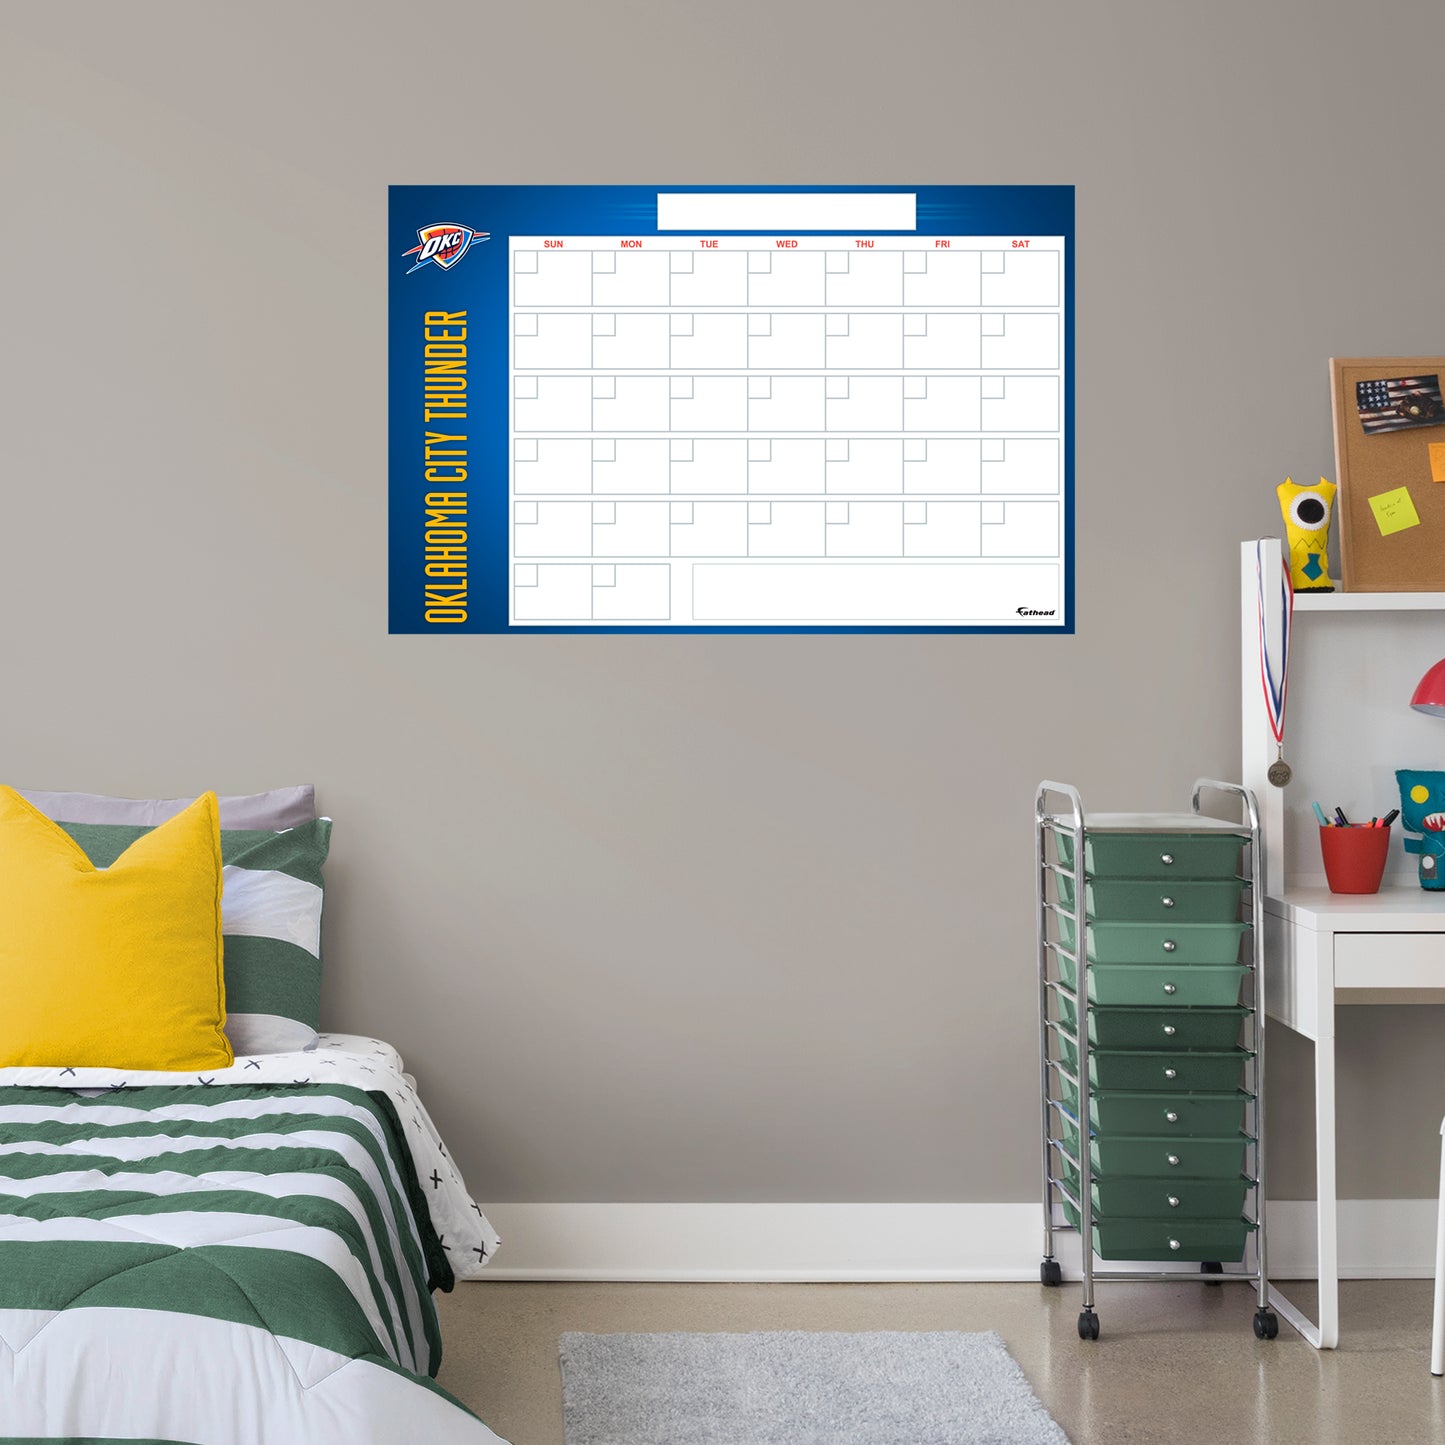 Oklahoma City Thunder Dry Erase Calendar  - Officially Licensed NBA Removable Wall Decal